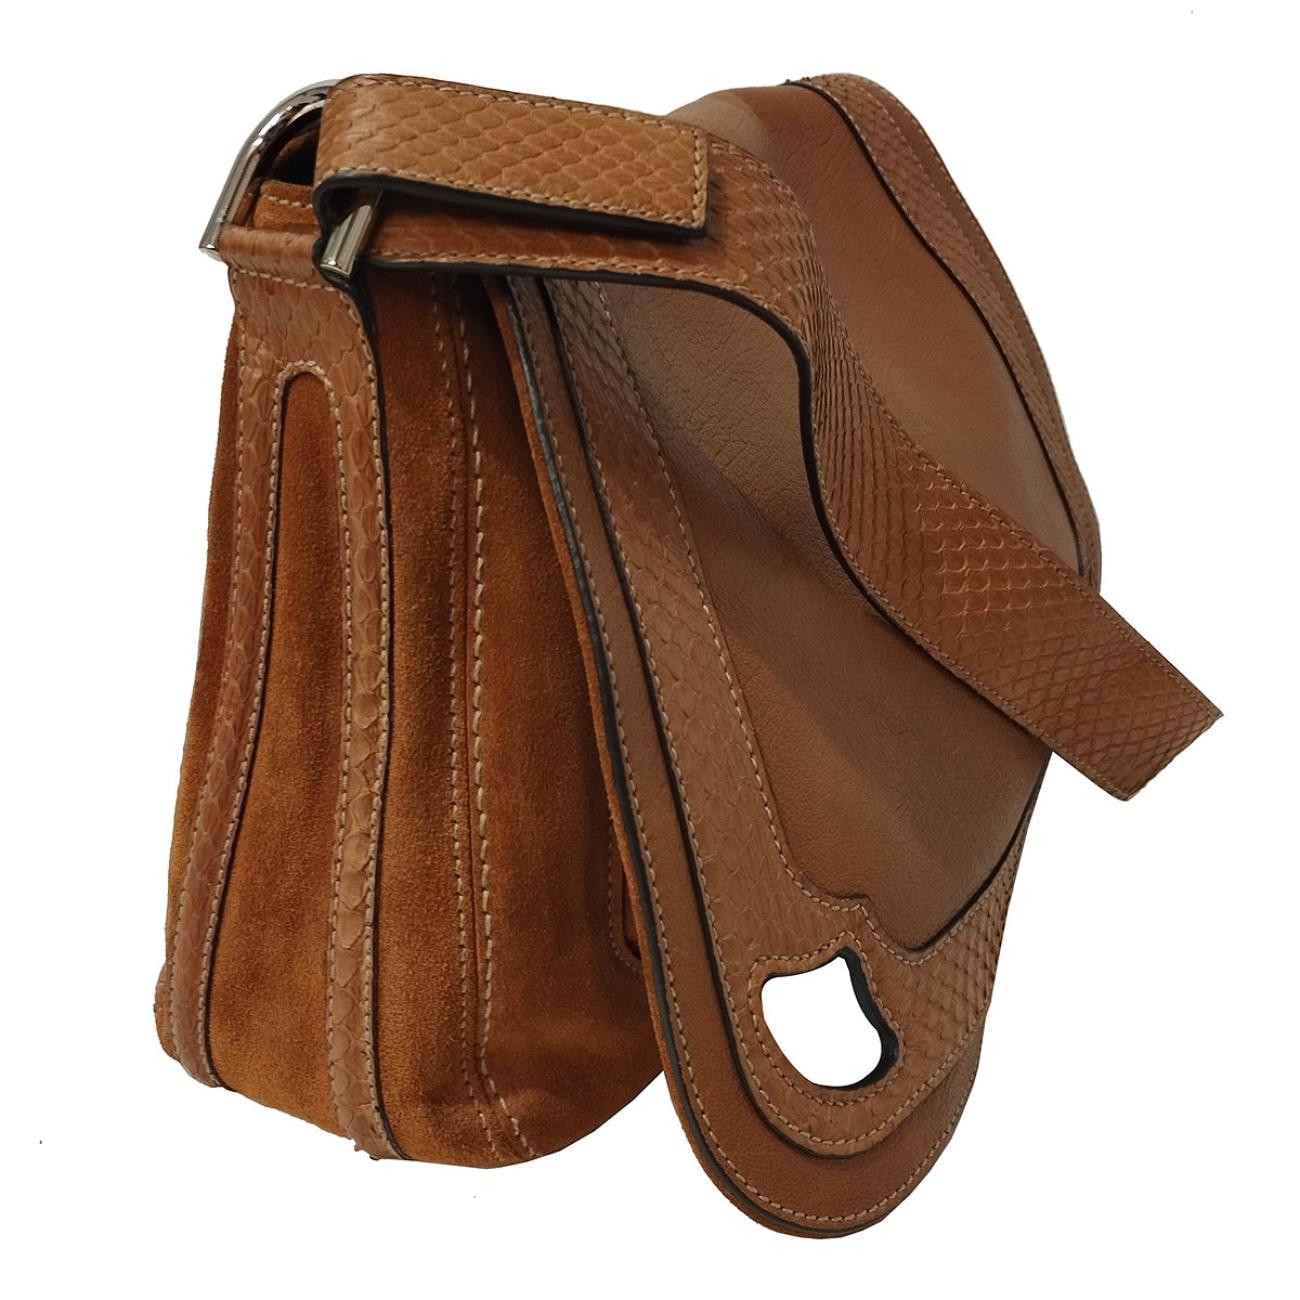 Marcello saddle bag
Leather
Cognac color
Real python strap
Can be carried by hand too
Large external pocket
Additional zipped pockets
Cm 33 x 23 x 11 (12,99 x 9 x 4,33 inches)